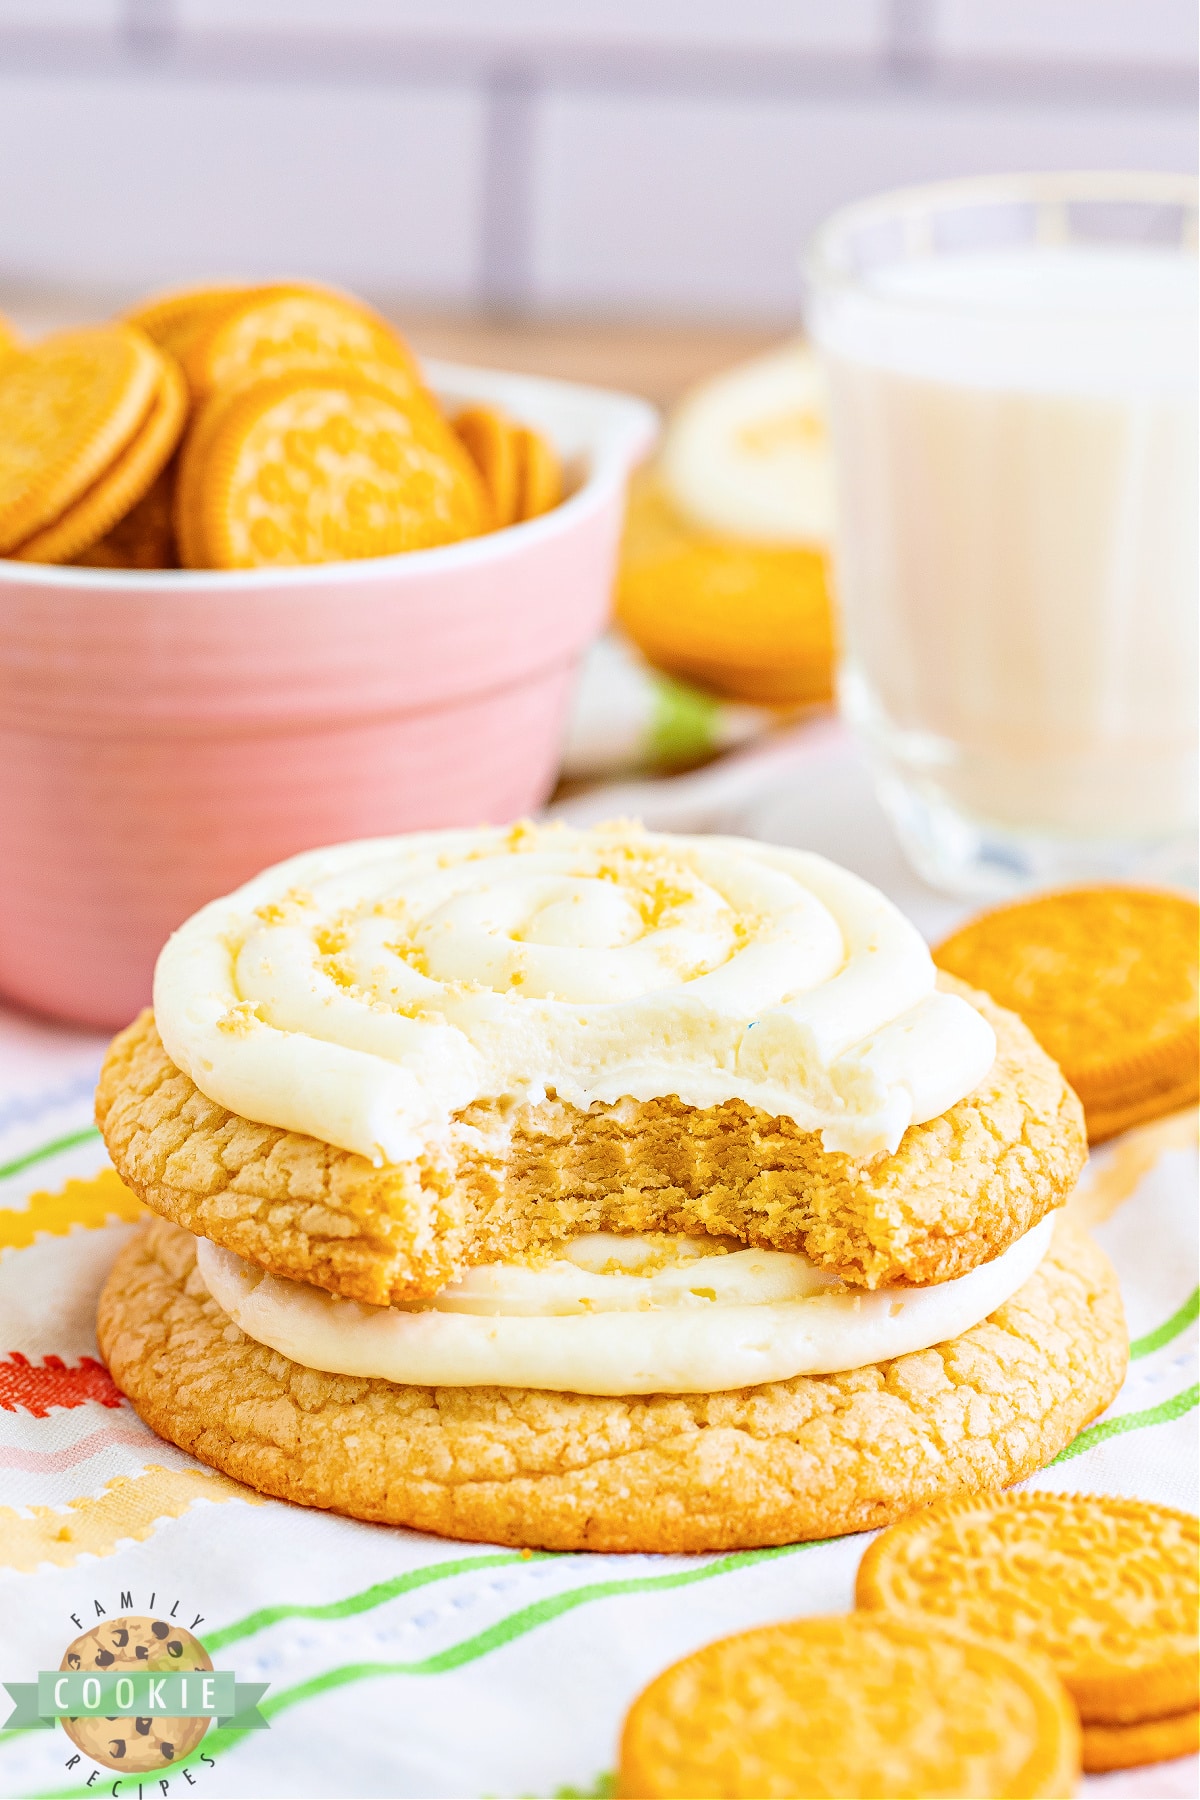 Copycat Crumbl Golden Oreo Cookies are made with Golden Oreo crumbs in the dough, a delicious cream cheese frosting, and more cookie crumbs on top. These thick and chewy vanilla cookies are incredible!